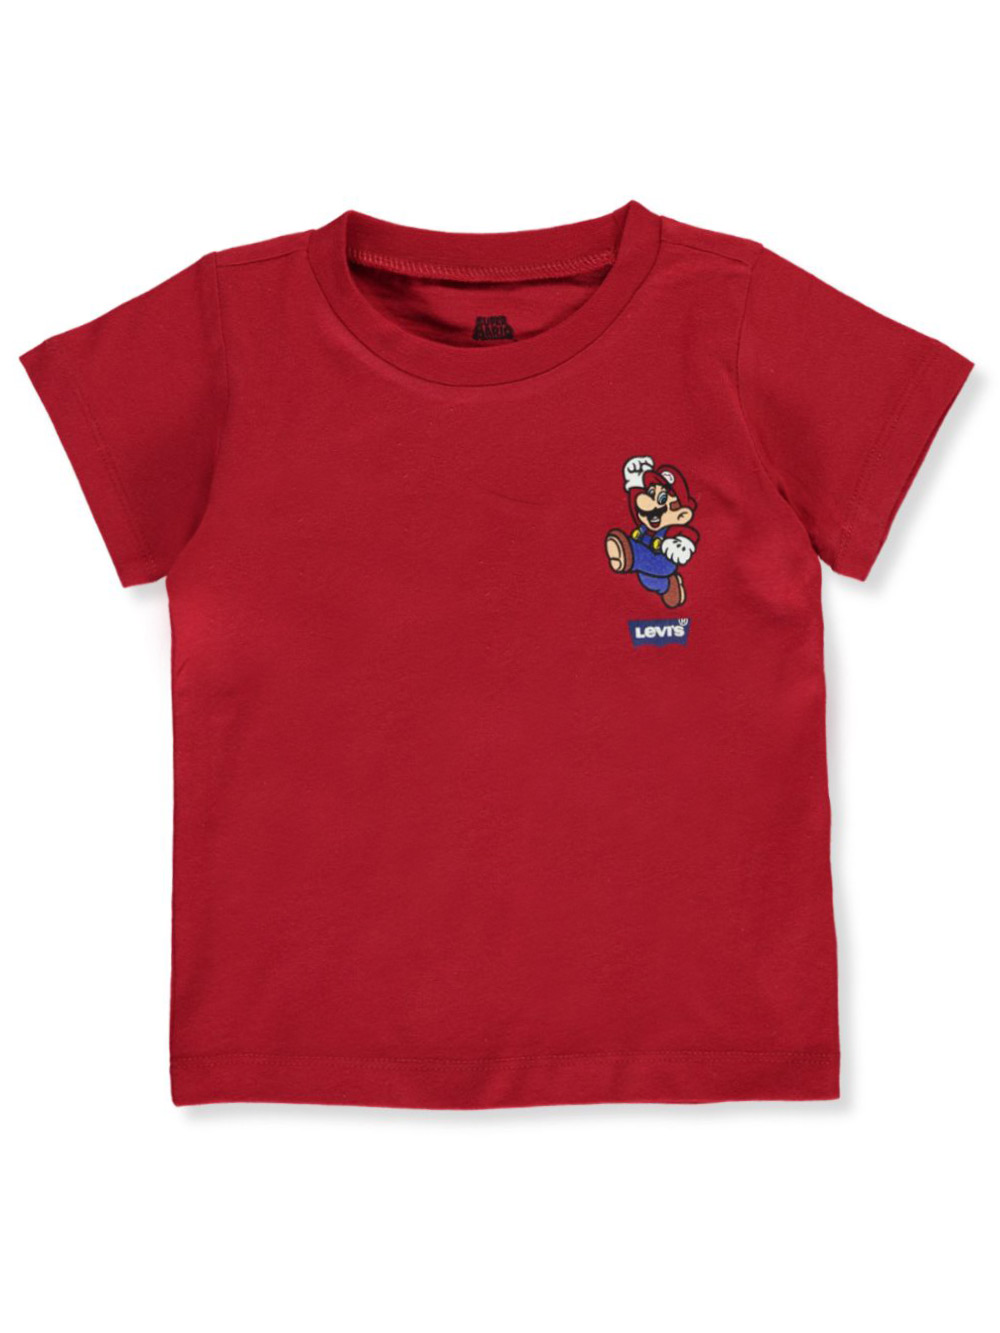 Size 12 T-Shirts for Boys